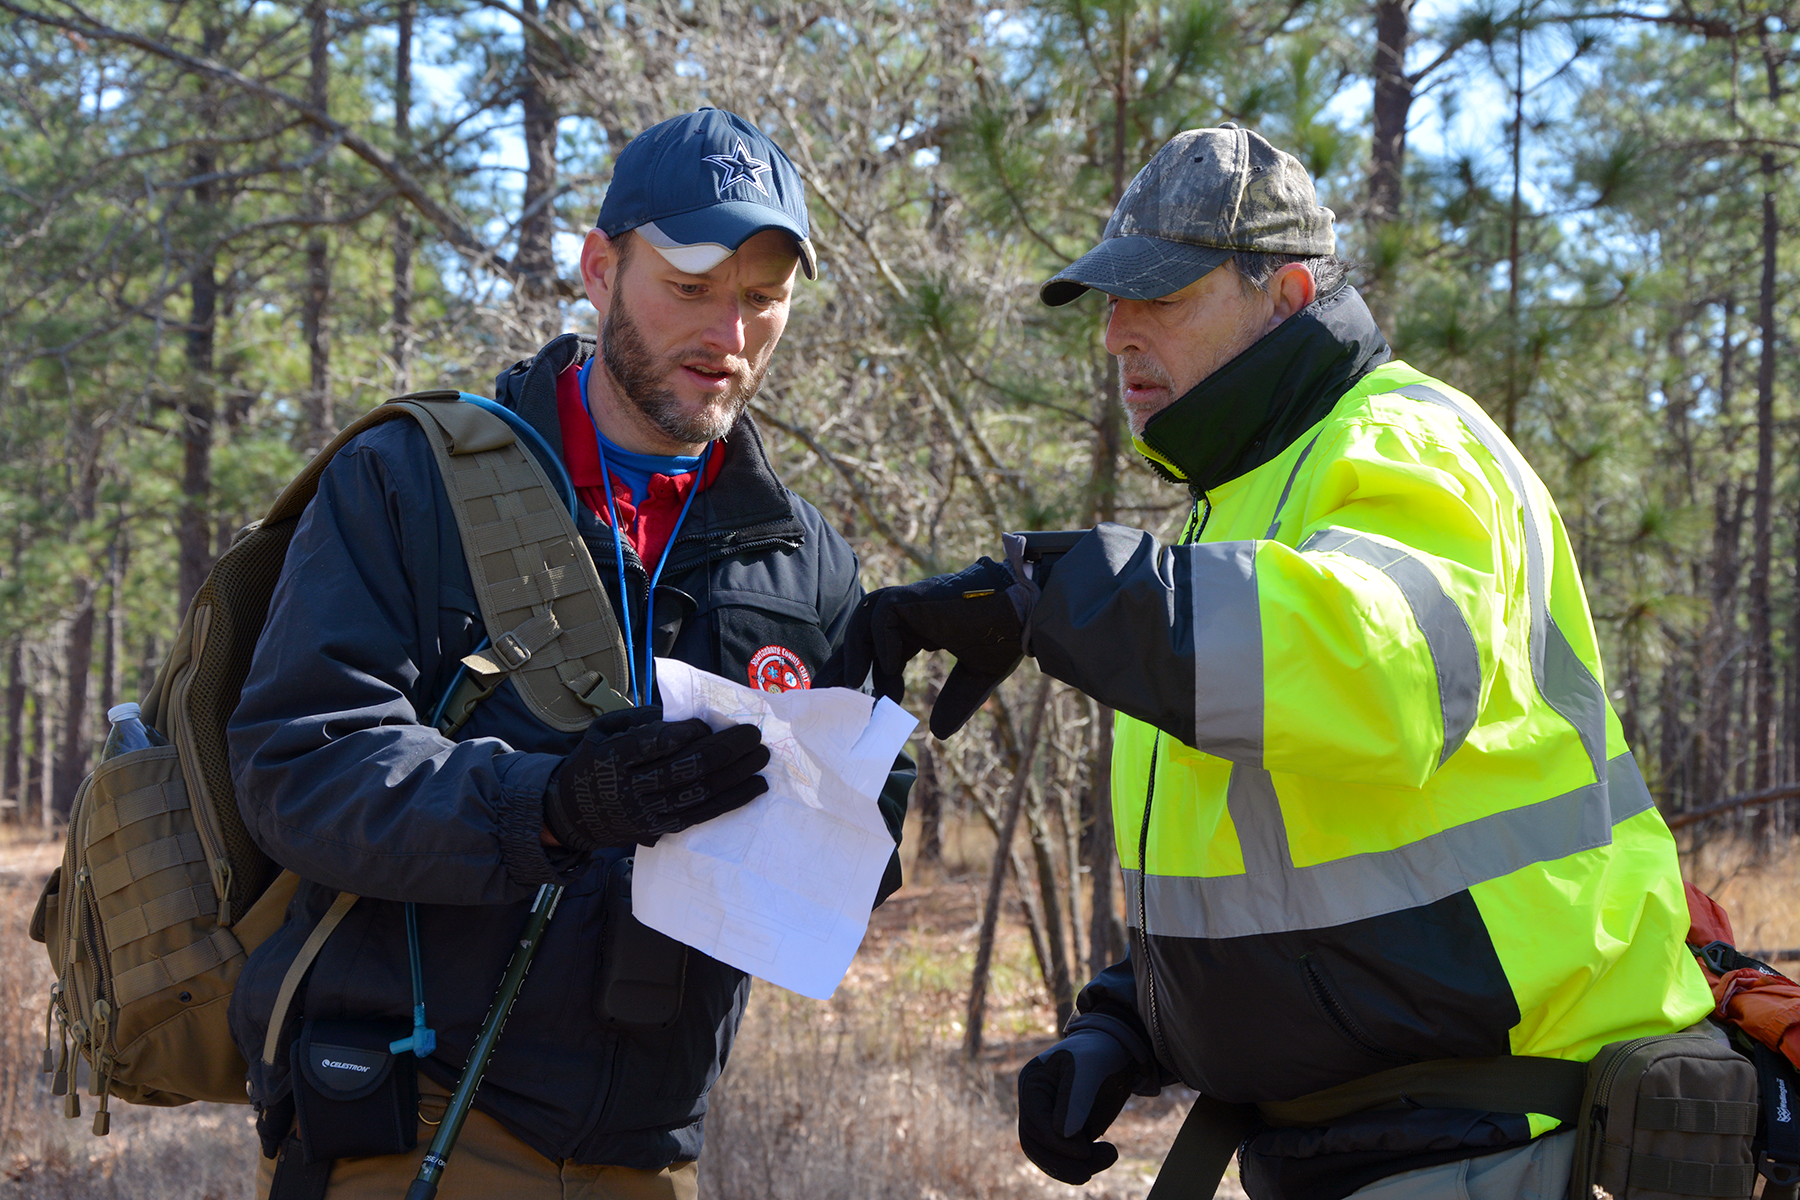 Two members of a search and rescue team look at a map of the operational area